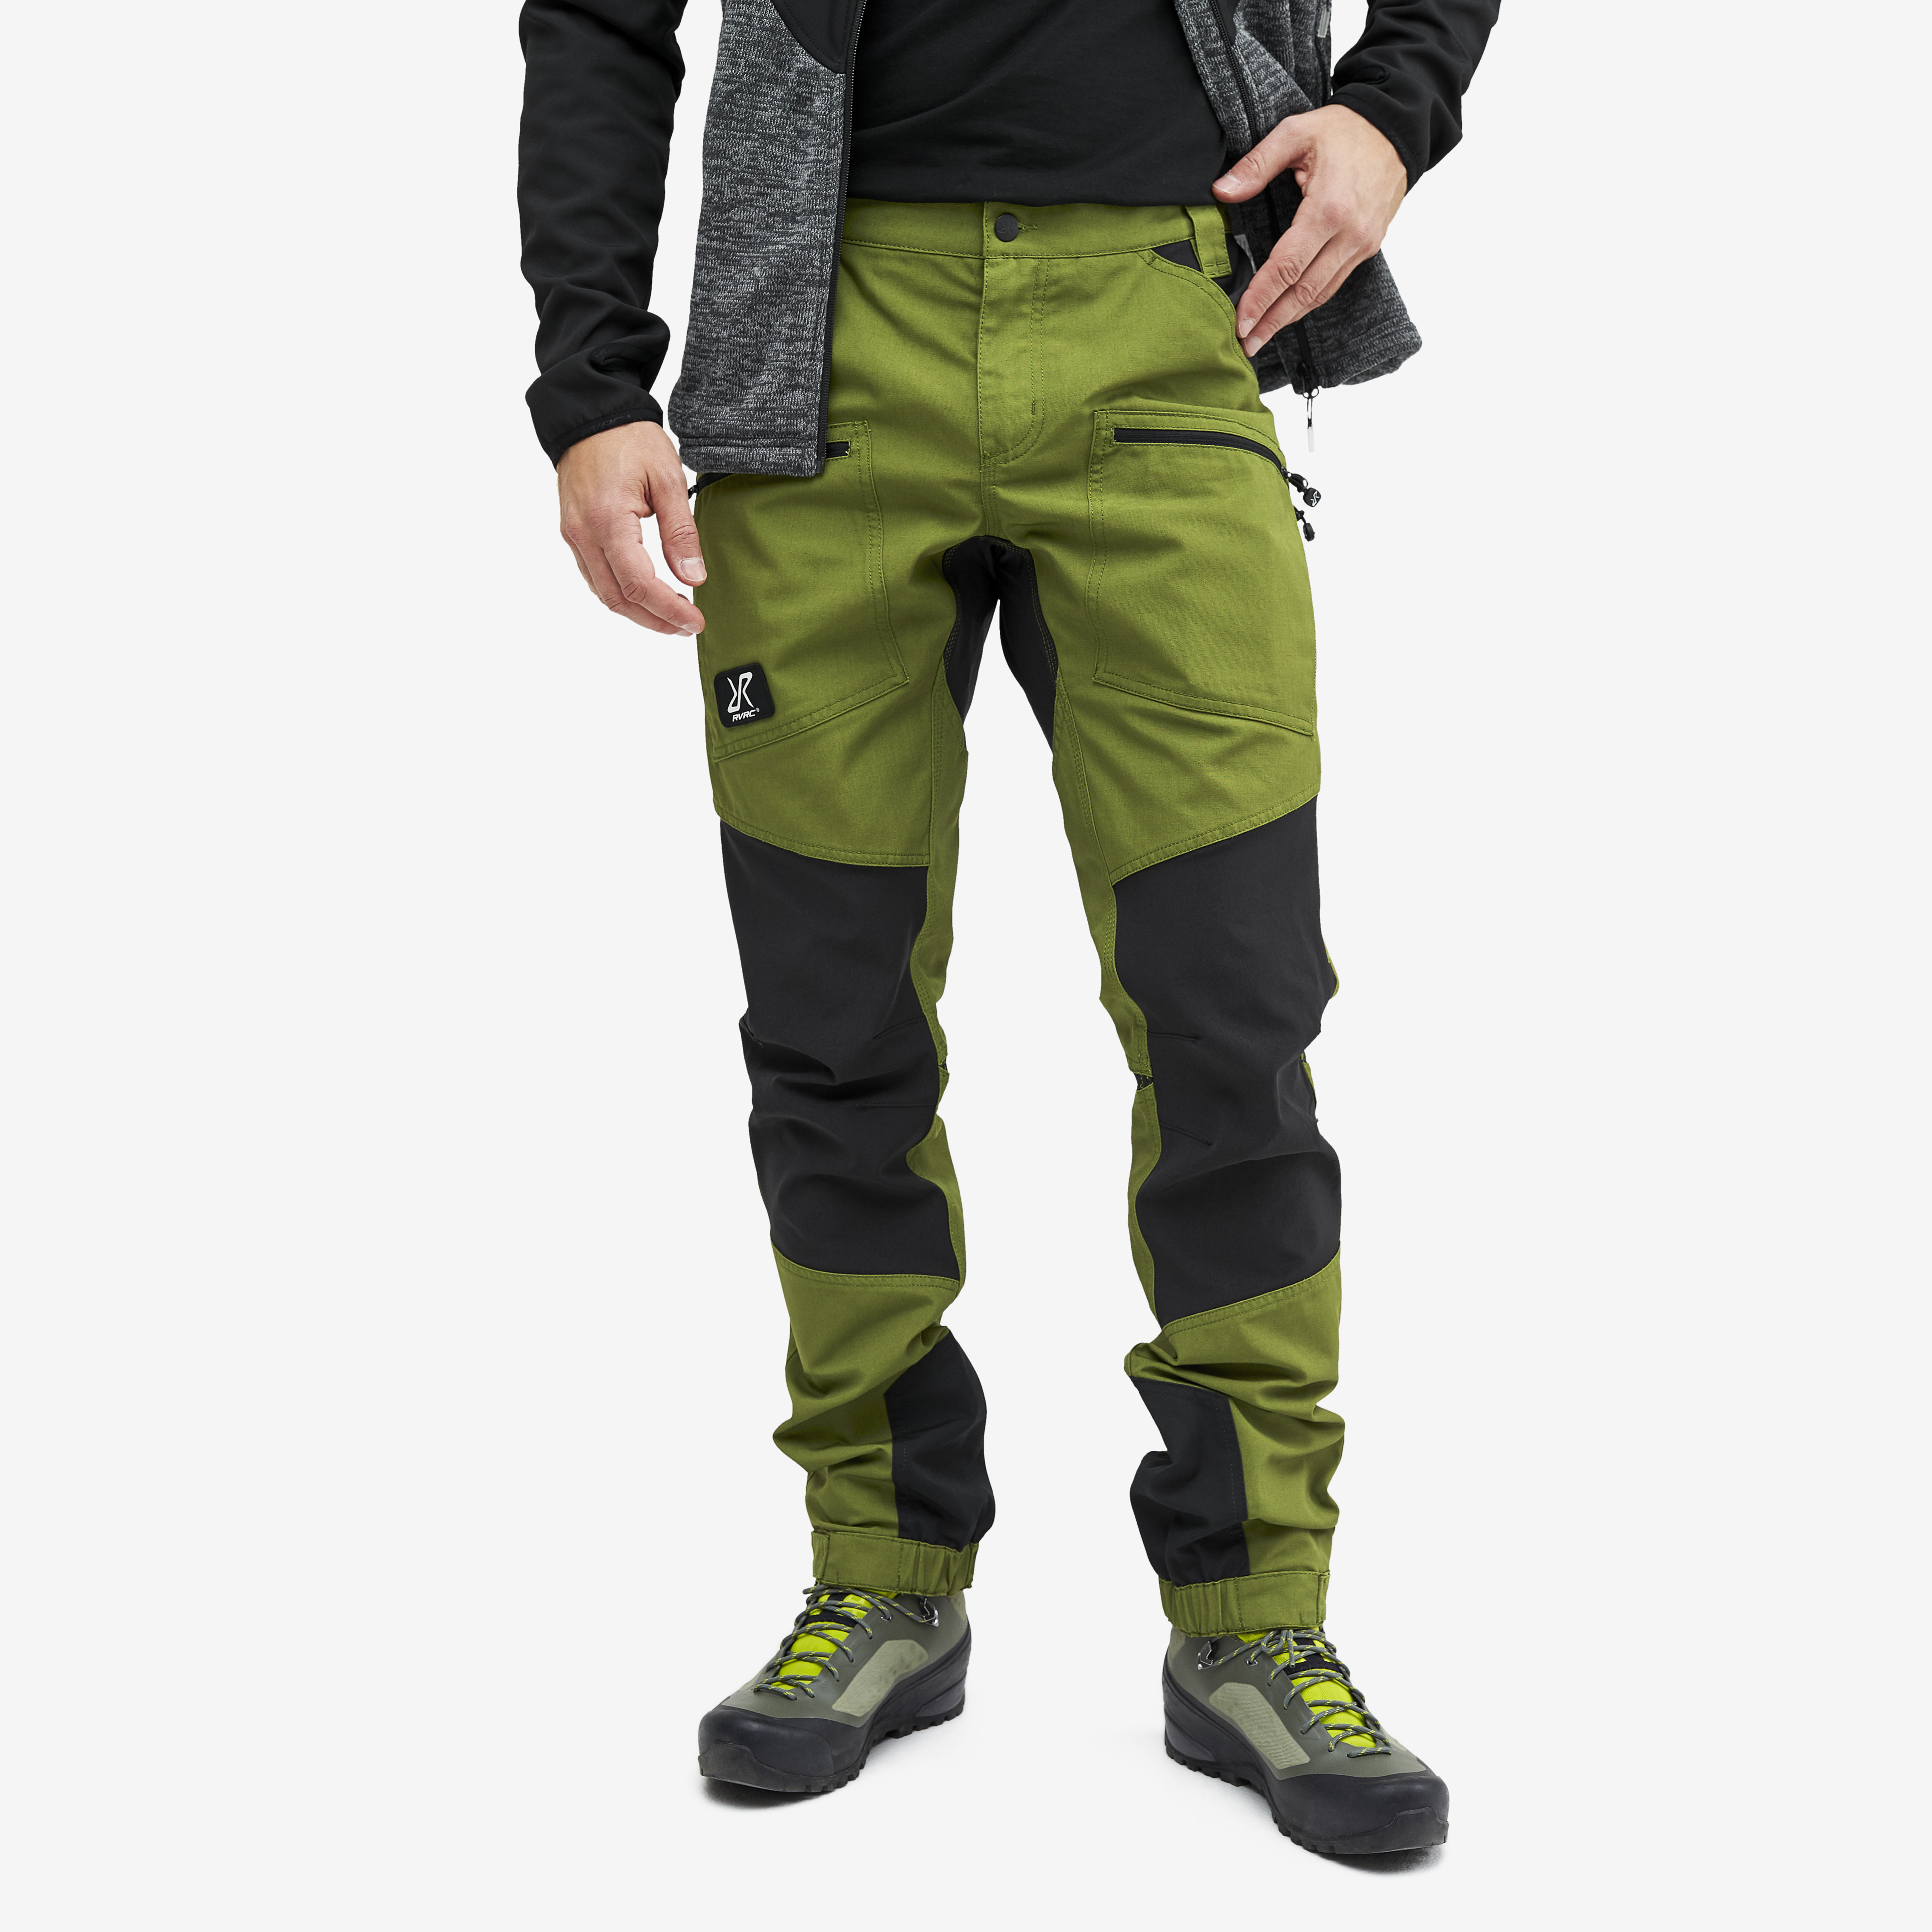 Nordwand Pro Trousers Cactus Green Men